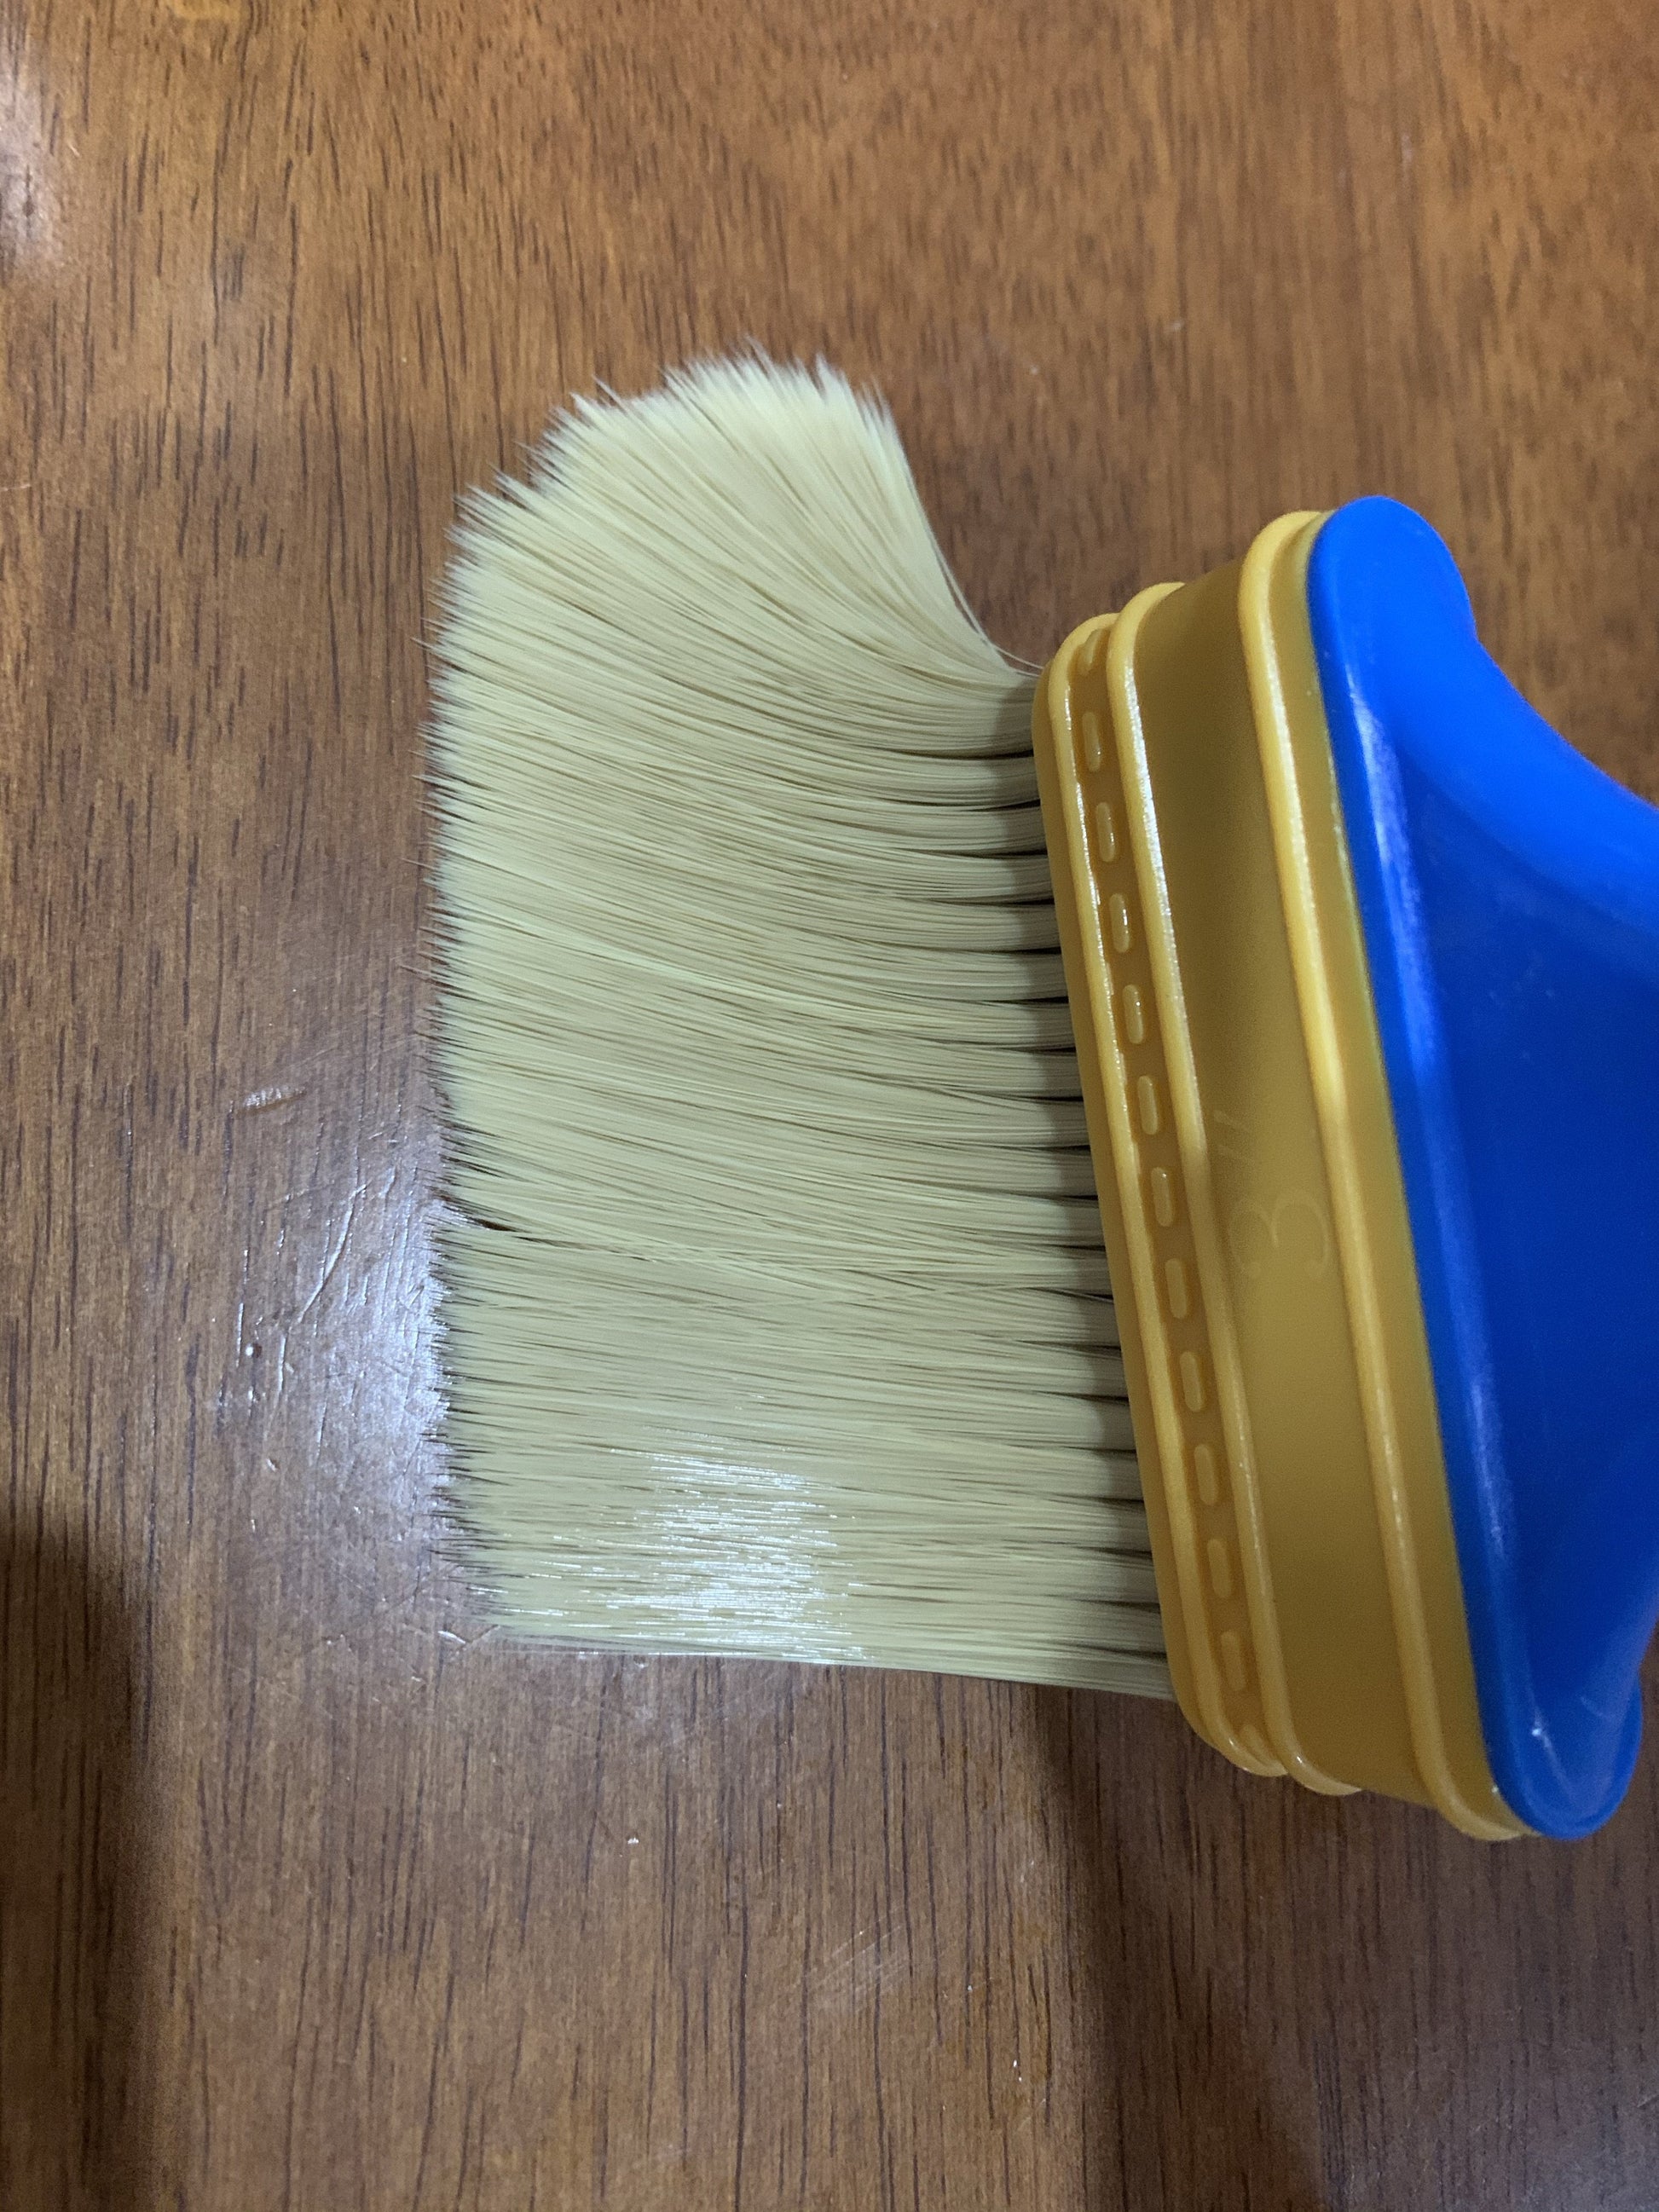 Brush for once off use